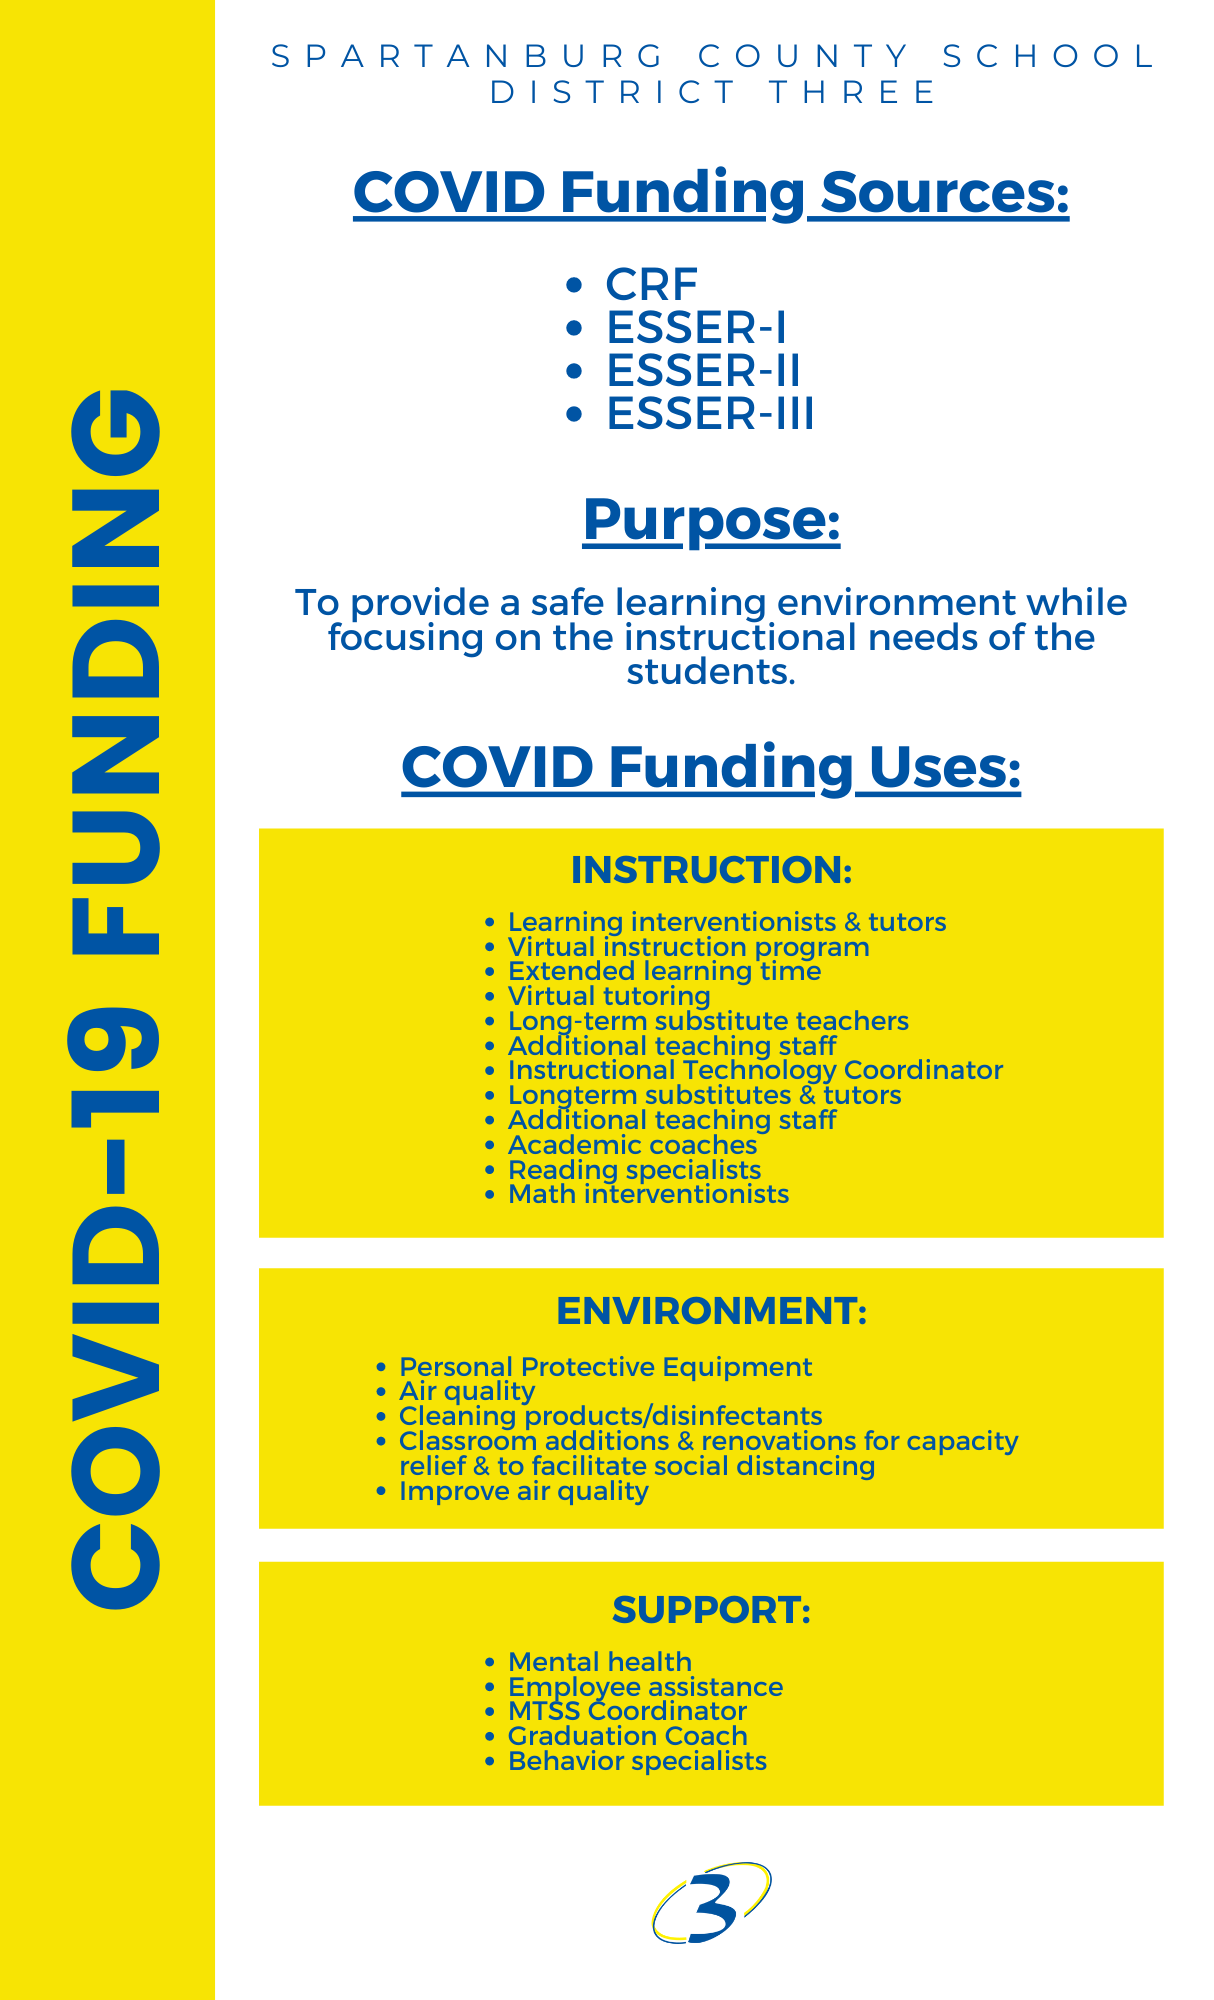 COVID Funding sources: CRF, ESSER I, ESSER II. Purpose: To provide a safe learning environment while focusing on the instructional needs of the students.